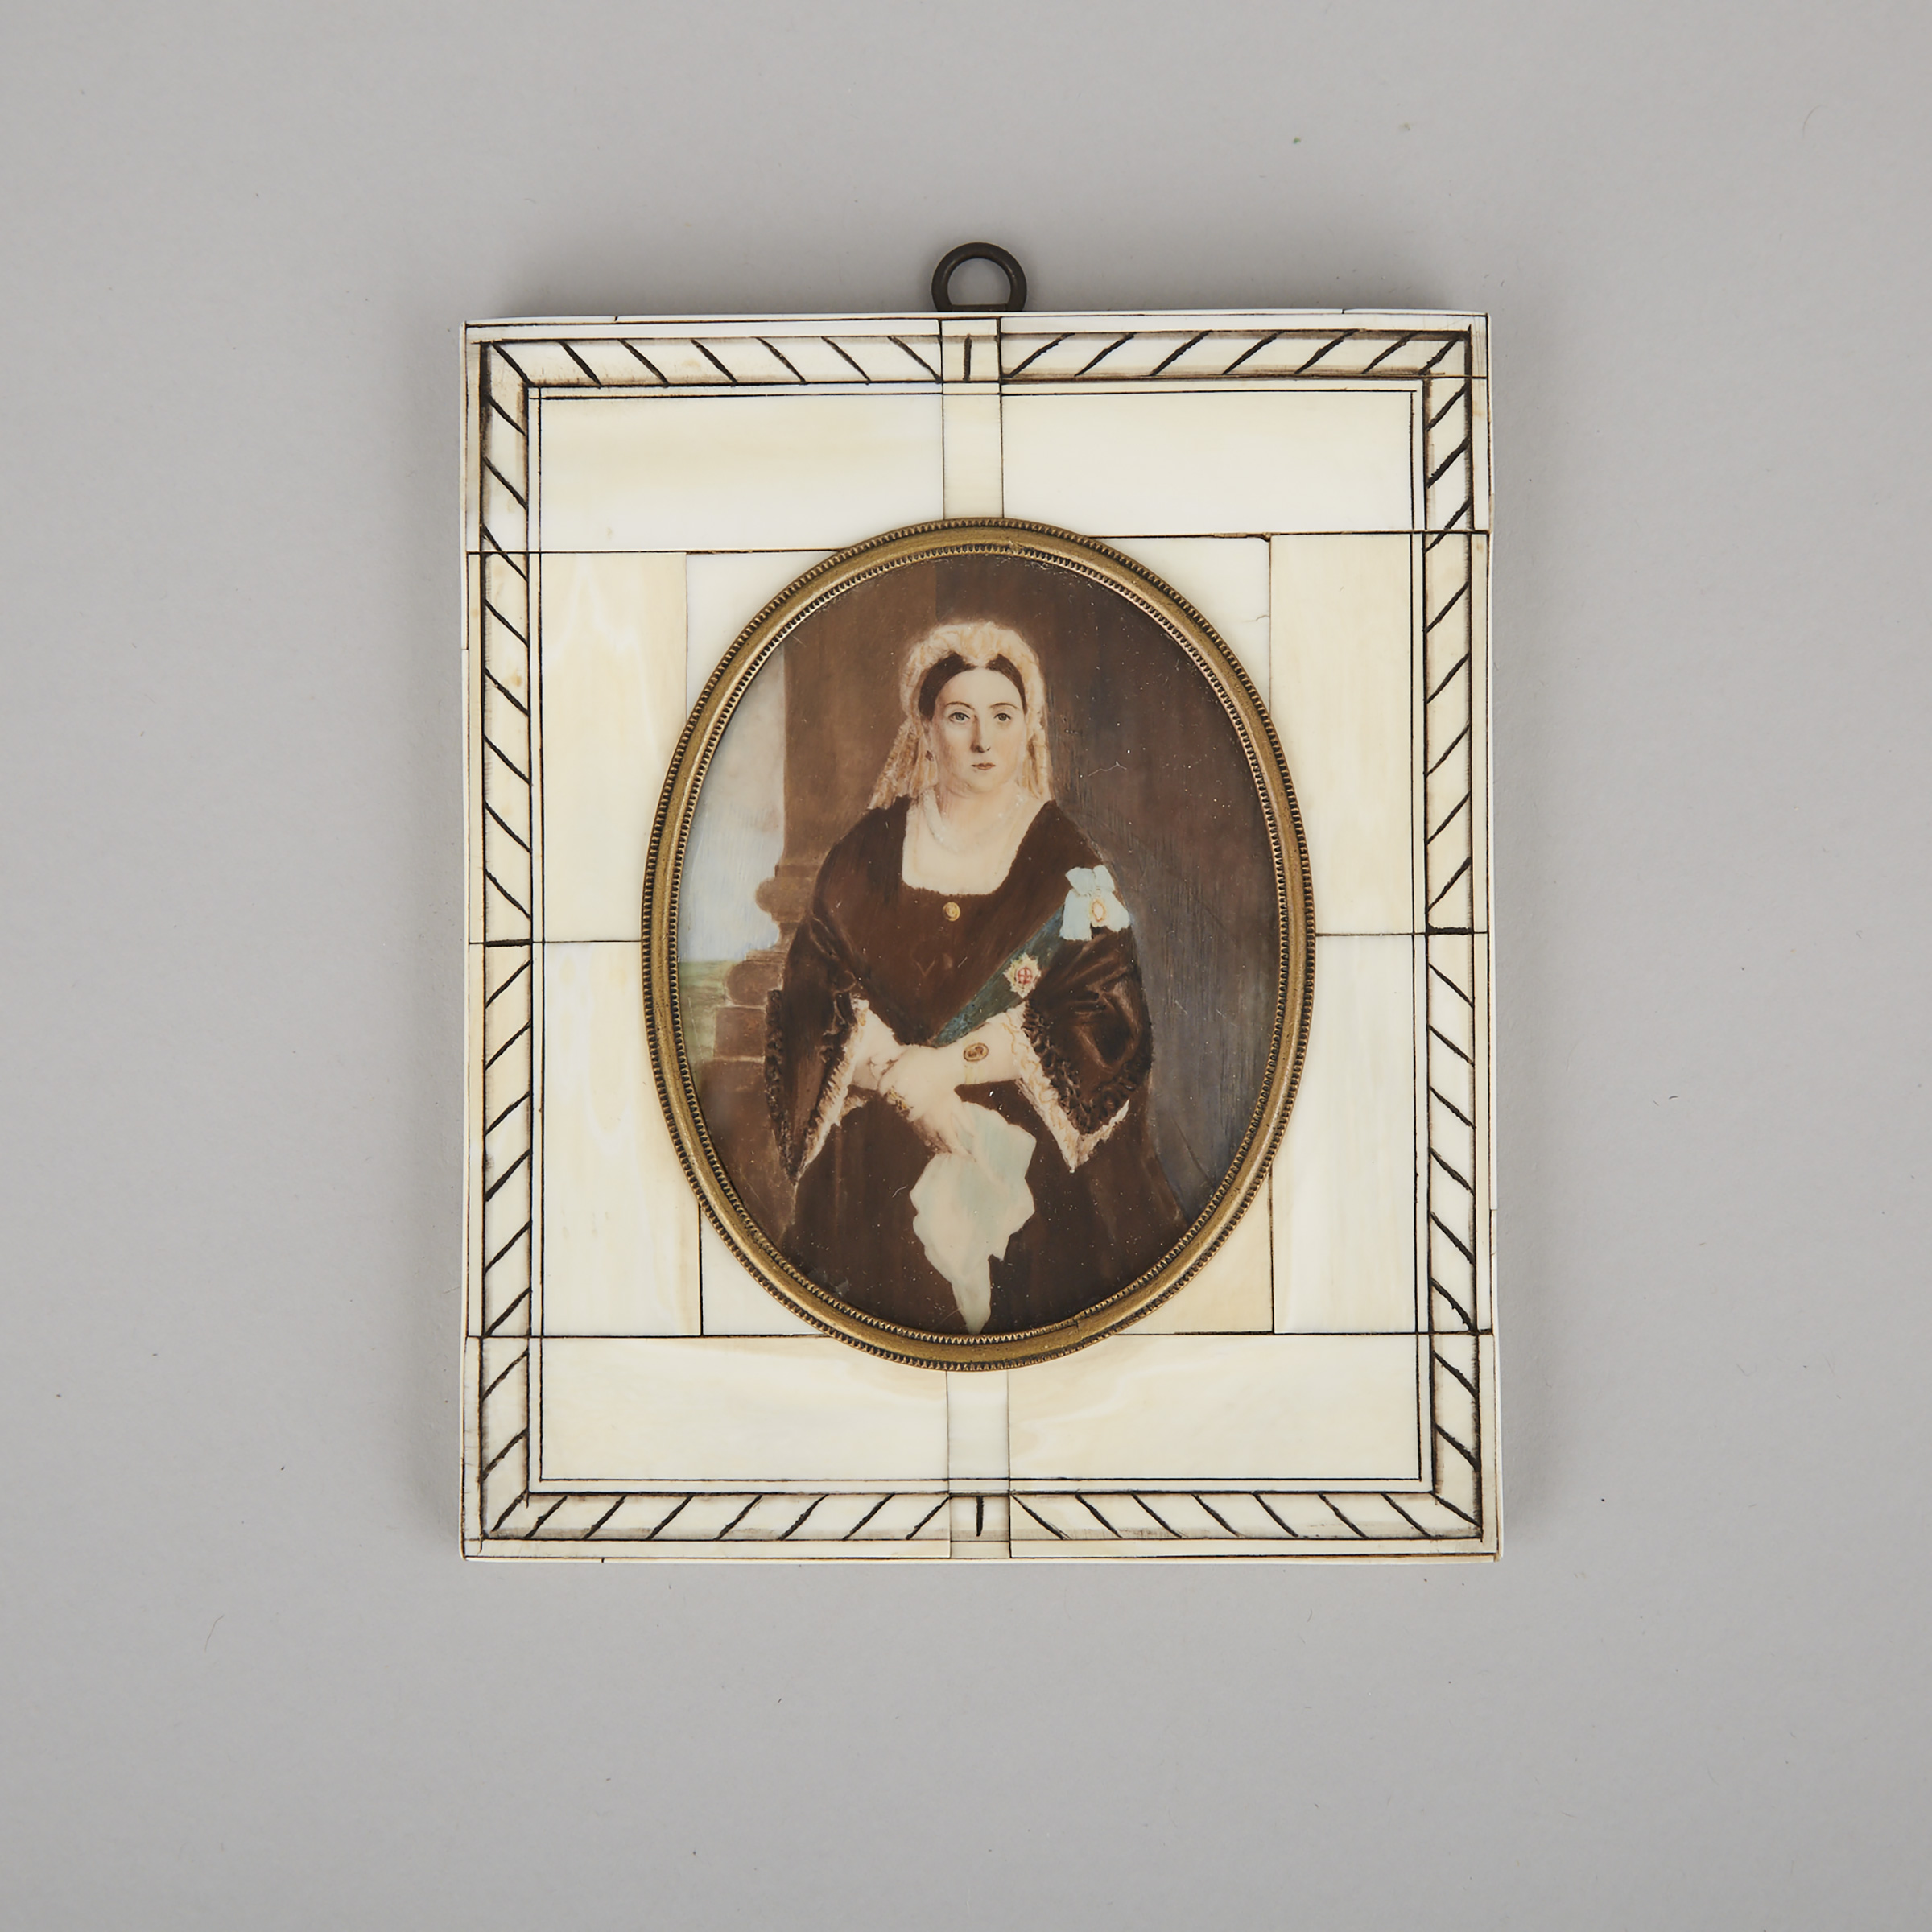 Hand Coloured Portrait Miniature Photograph on Ivory of Queen Victoria, 19th century